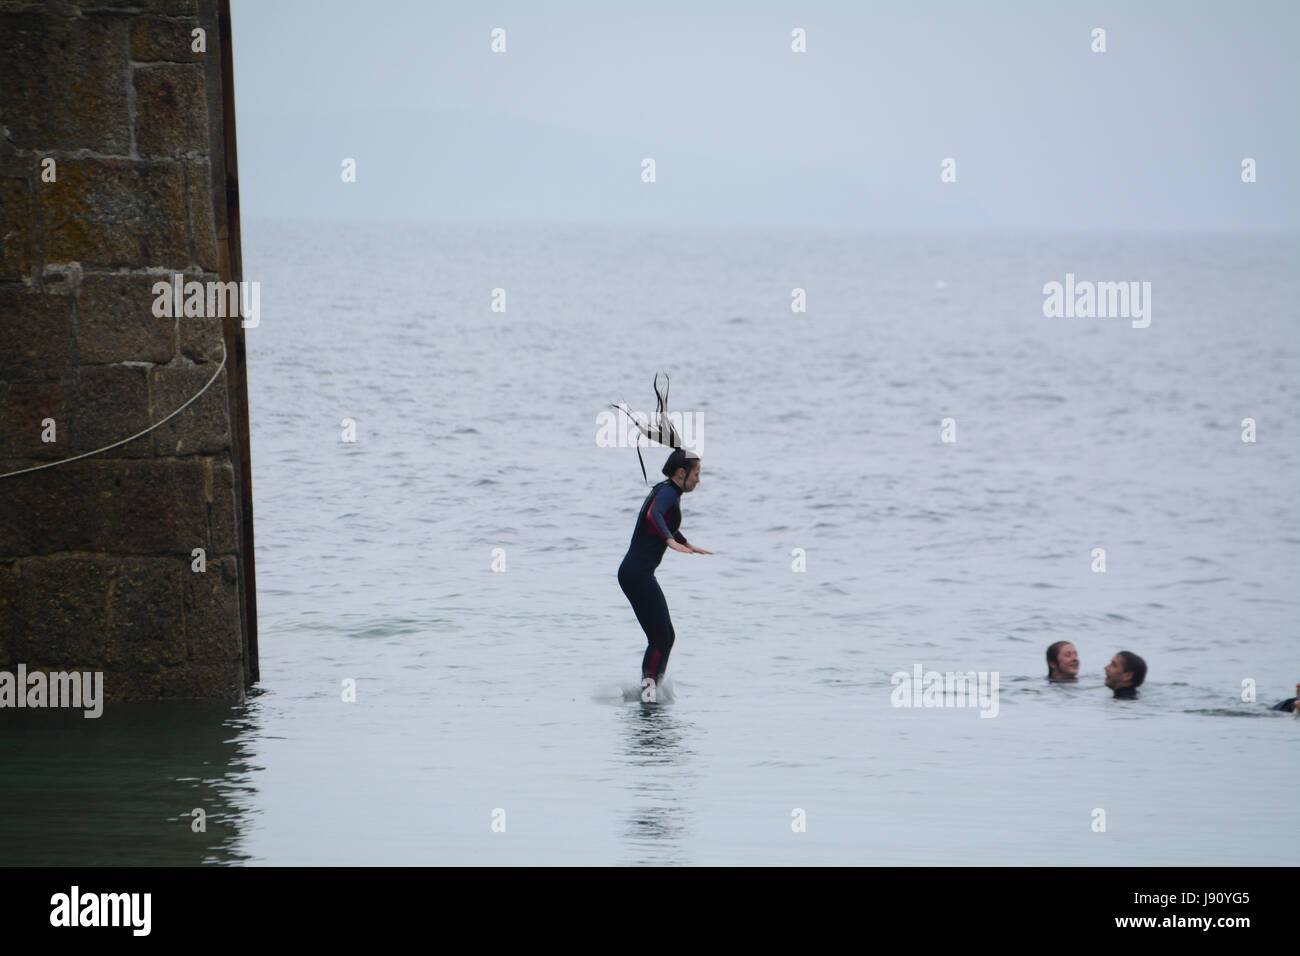 Mousheole Harbour, Cornwall,UK. 31st May 2017. UK Weather. After a misty start to the day, the weather is getting warmer on the Cornish coast, with families enjoying the beach, and people jumping off the harbour wall into the sea. Credit: cwallpix/Alamy Live News Stock Photo